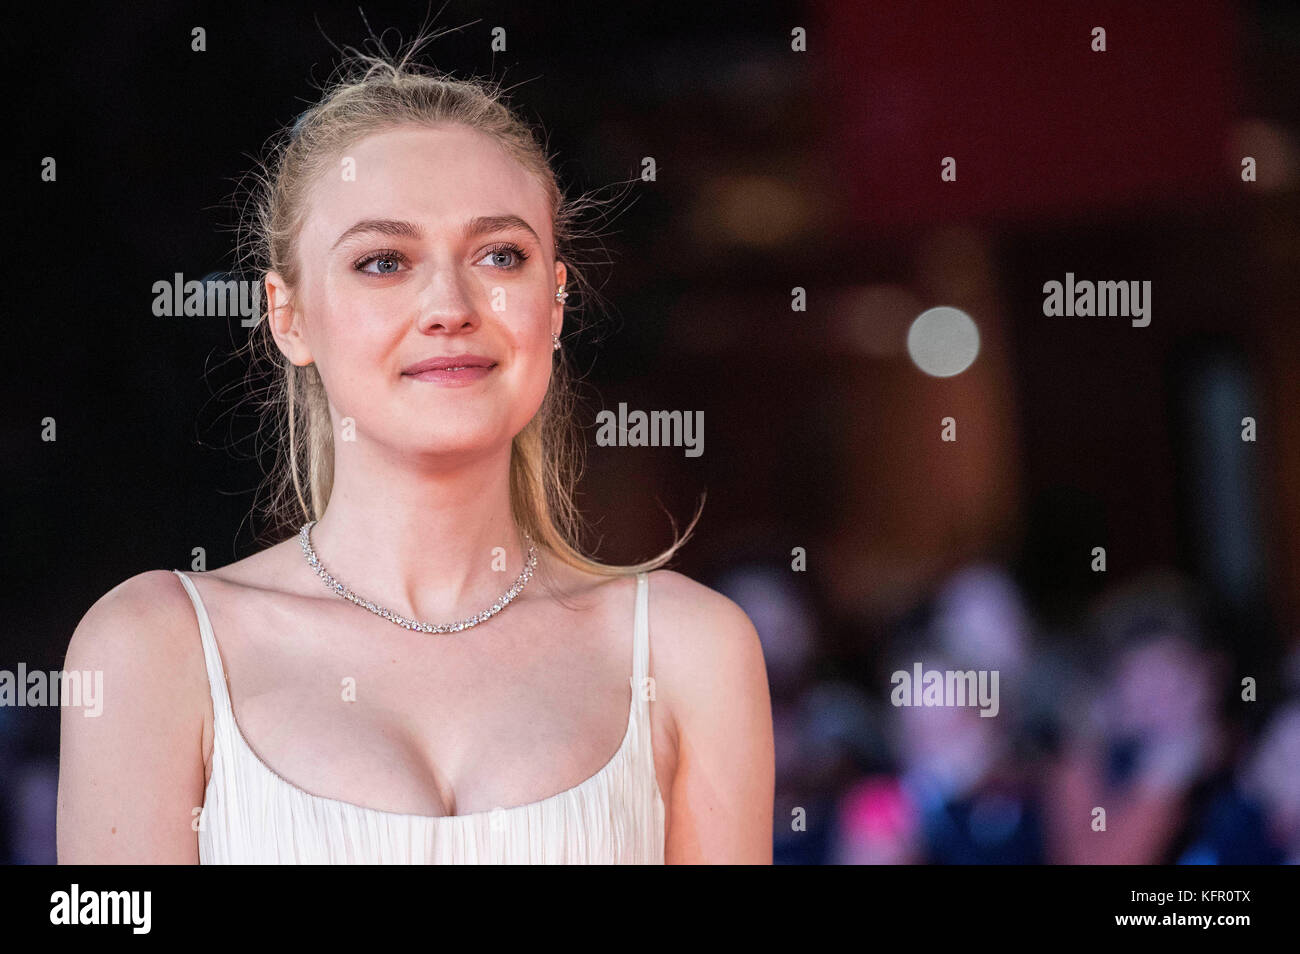 Dakota Fanning attends the 'Please Stand By' premiere during the 12th Rome Film Fest at Auditorium Parco Della Musica on October 31, 2017 in Rome, Italy. Stock Photo